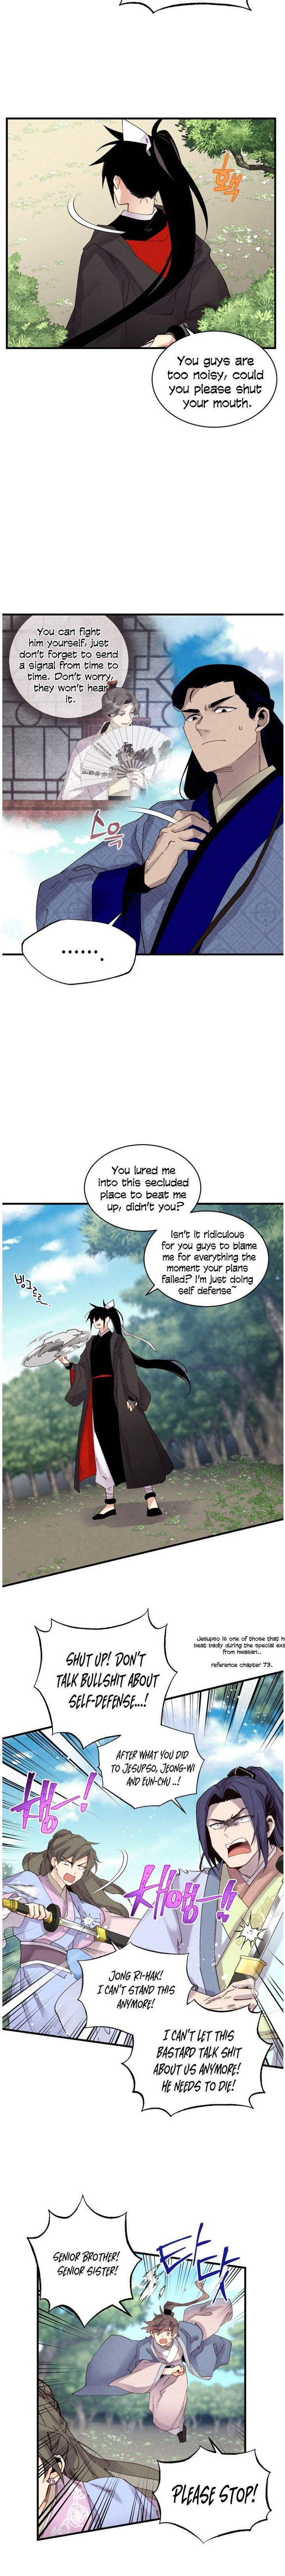 Lightning Degree - Chapter 91 Page 3